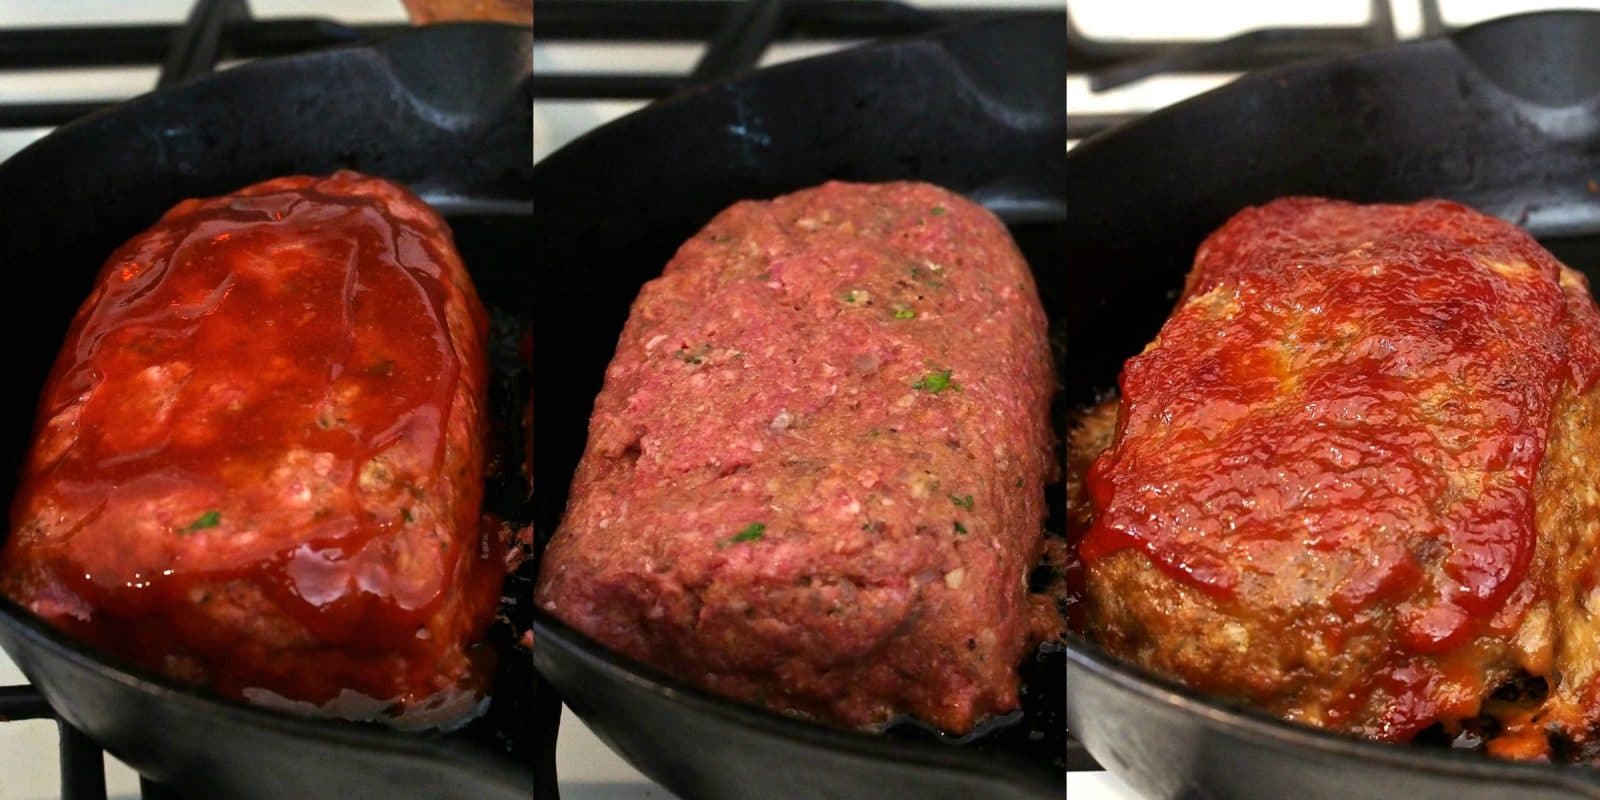 My Favorite Meatloaf-simple and flavorful. Serve as an entree or slice and place on toasty buns for great sandwiches. This recipe impresses every time. Simply Sated